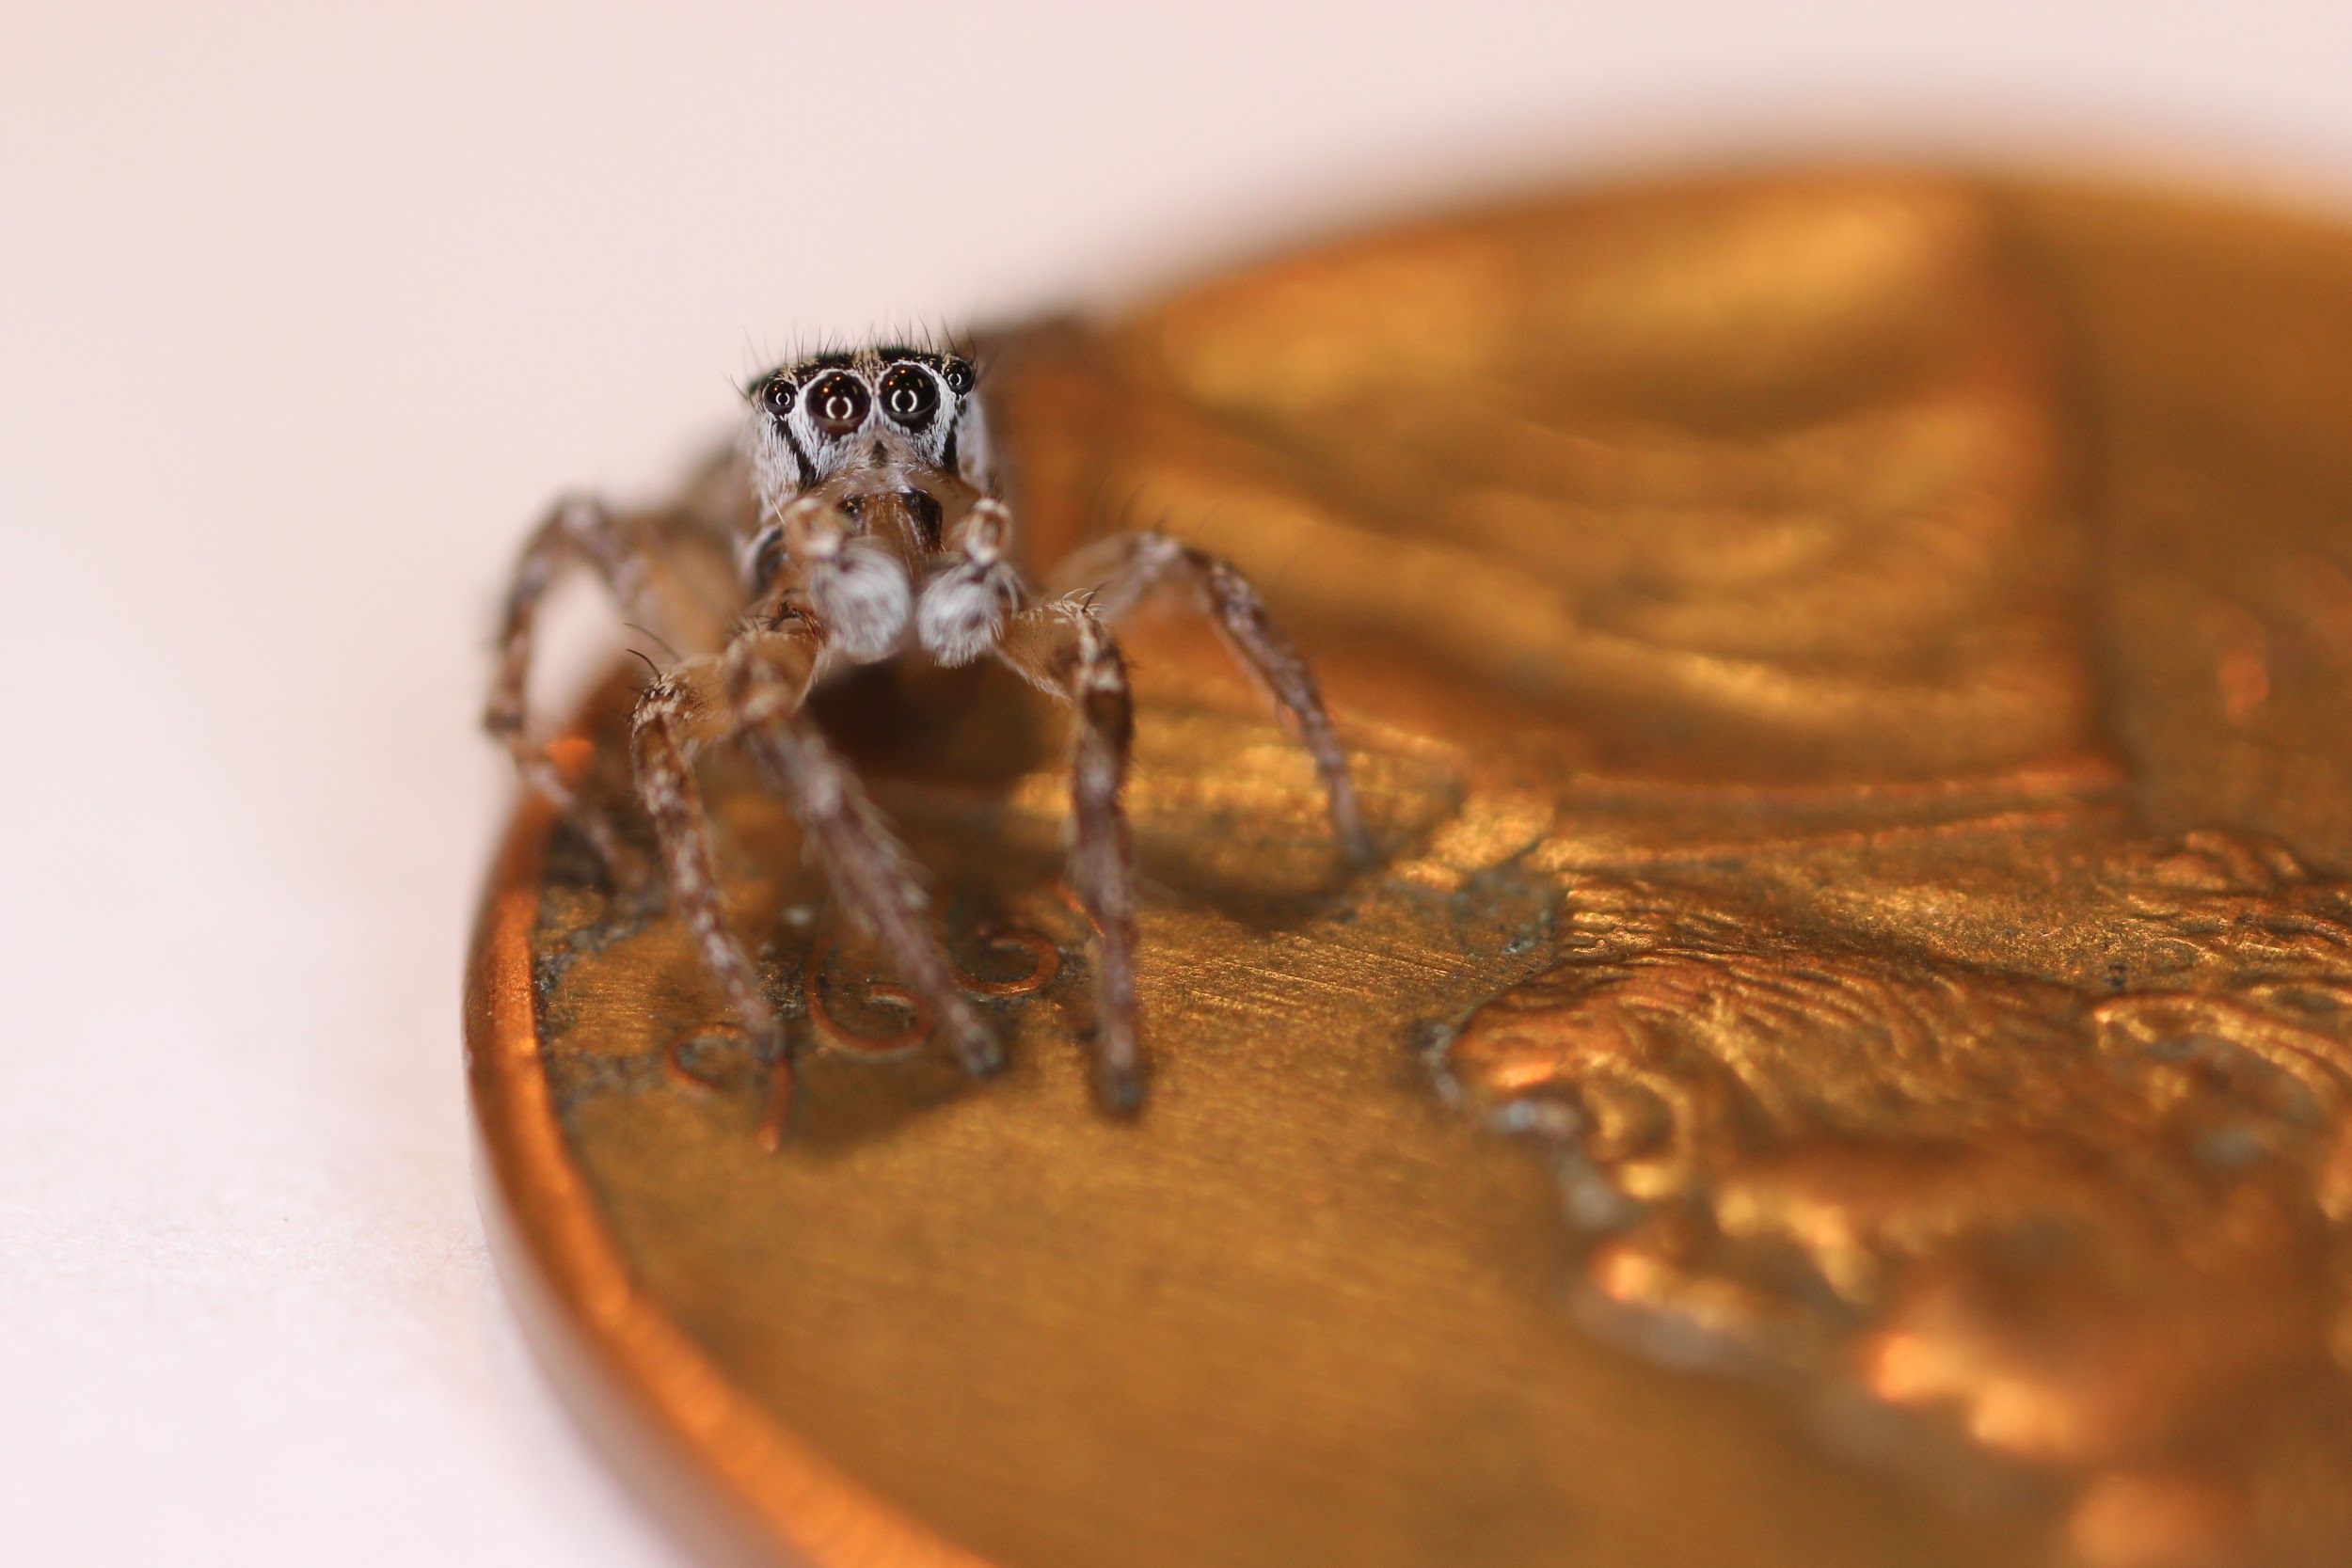 An adult male Habronattus trimaculatus sitting on a penny, highlighting his small size. Note the two enlarged forward-facing eyes that are characteristic of all jumping spiders. 